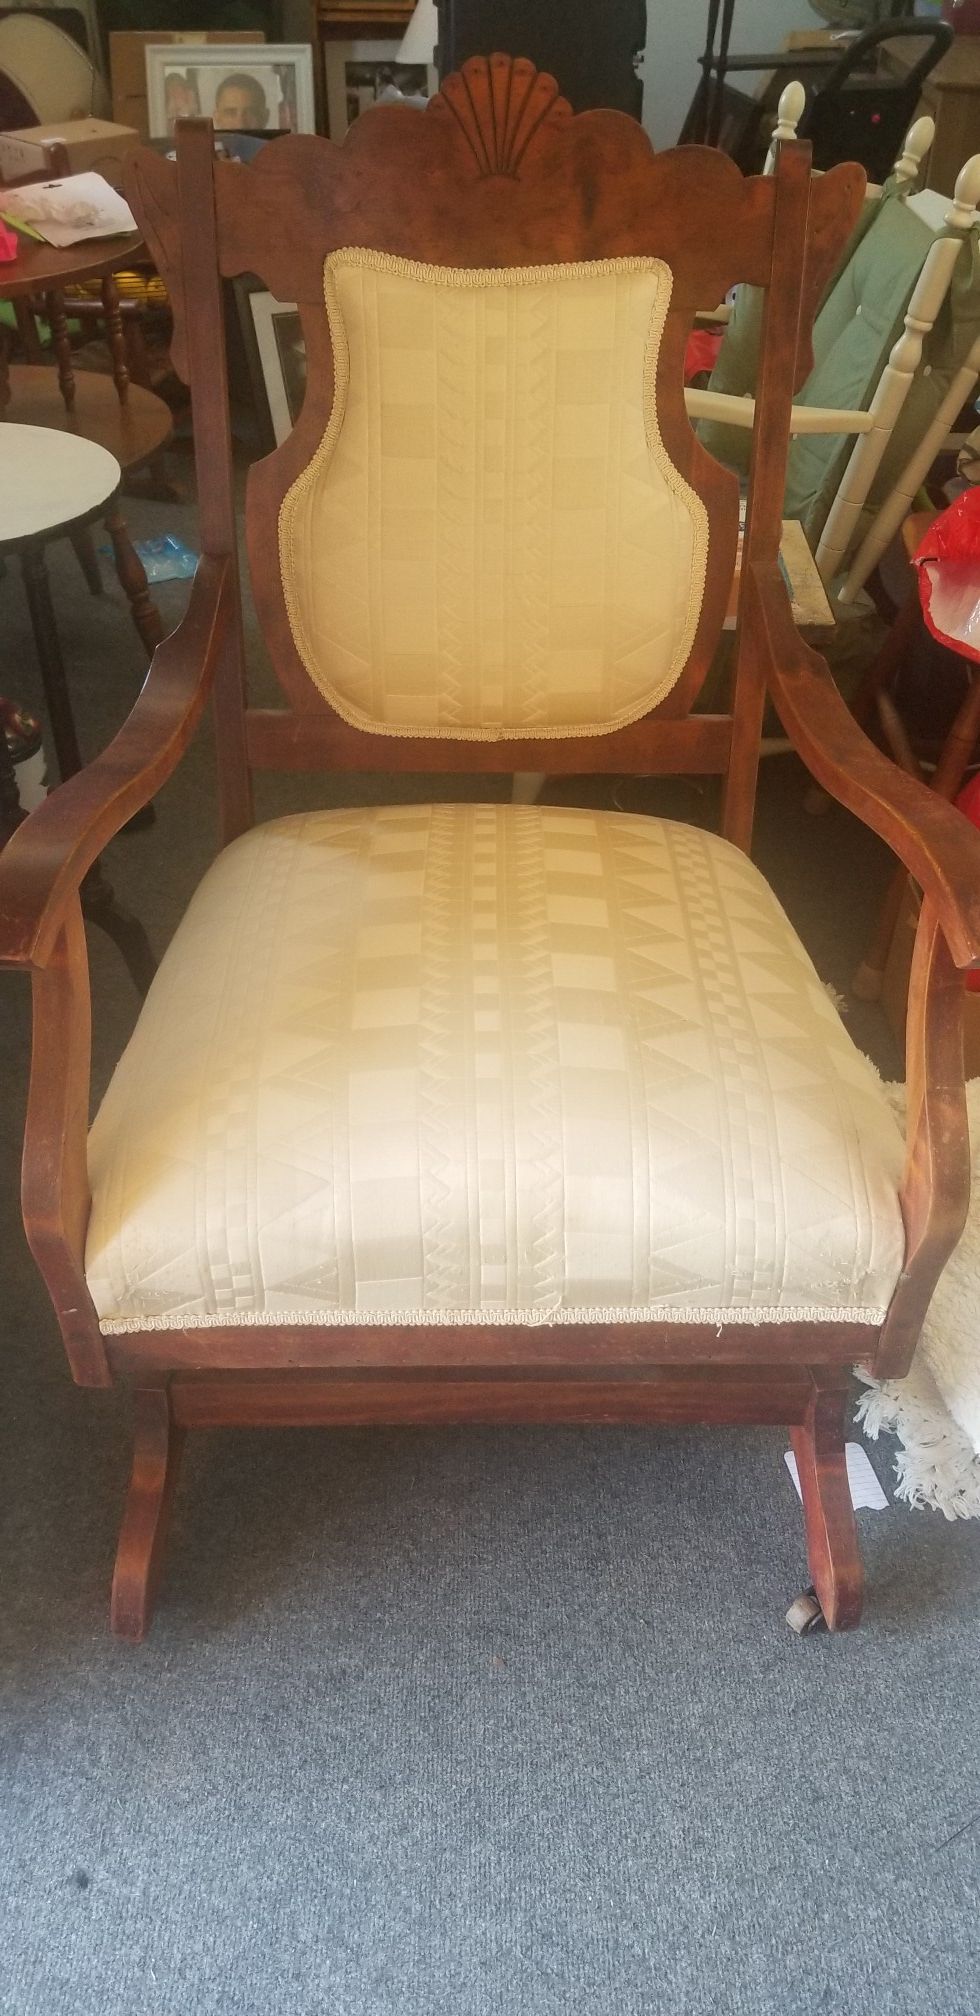 Antique Chair with original casters